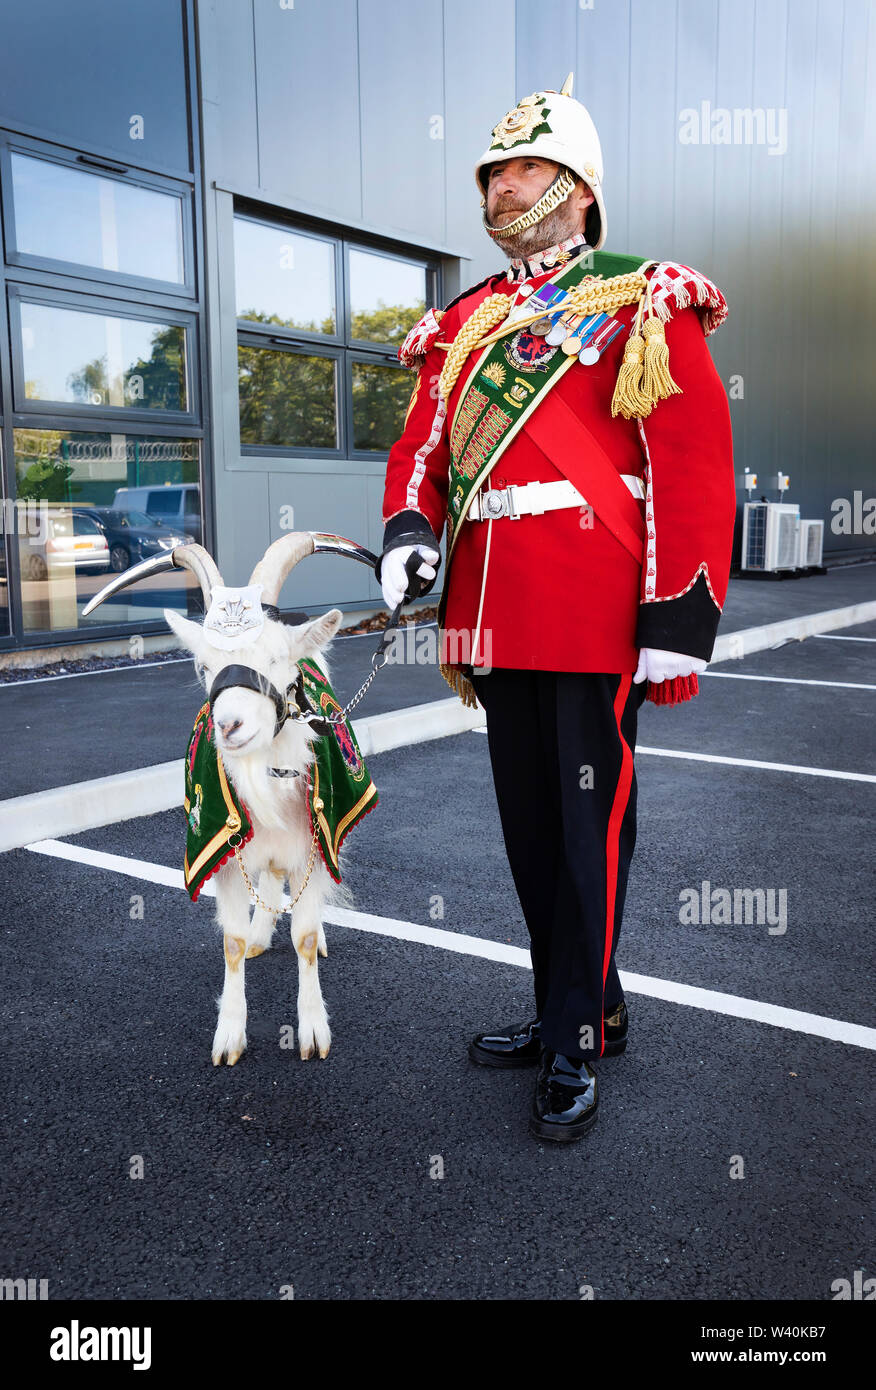 Photograph by © Jamie Callister. Goat Major Jackson and Fusilier Shenkin IV make a special appearance for the Qioptiq Board Visit 14th May 2019 Stock Photo